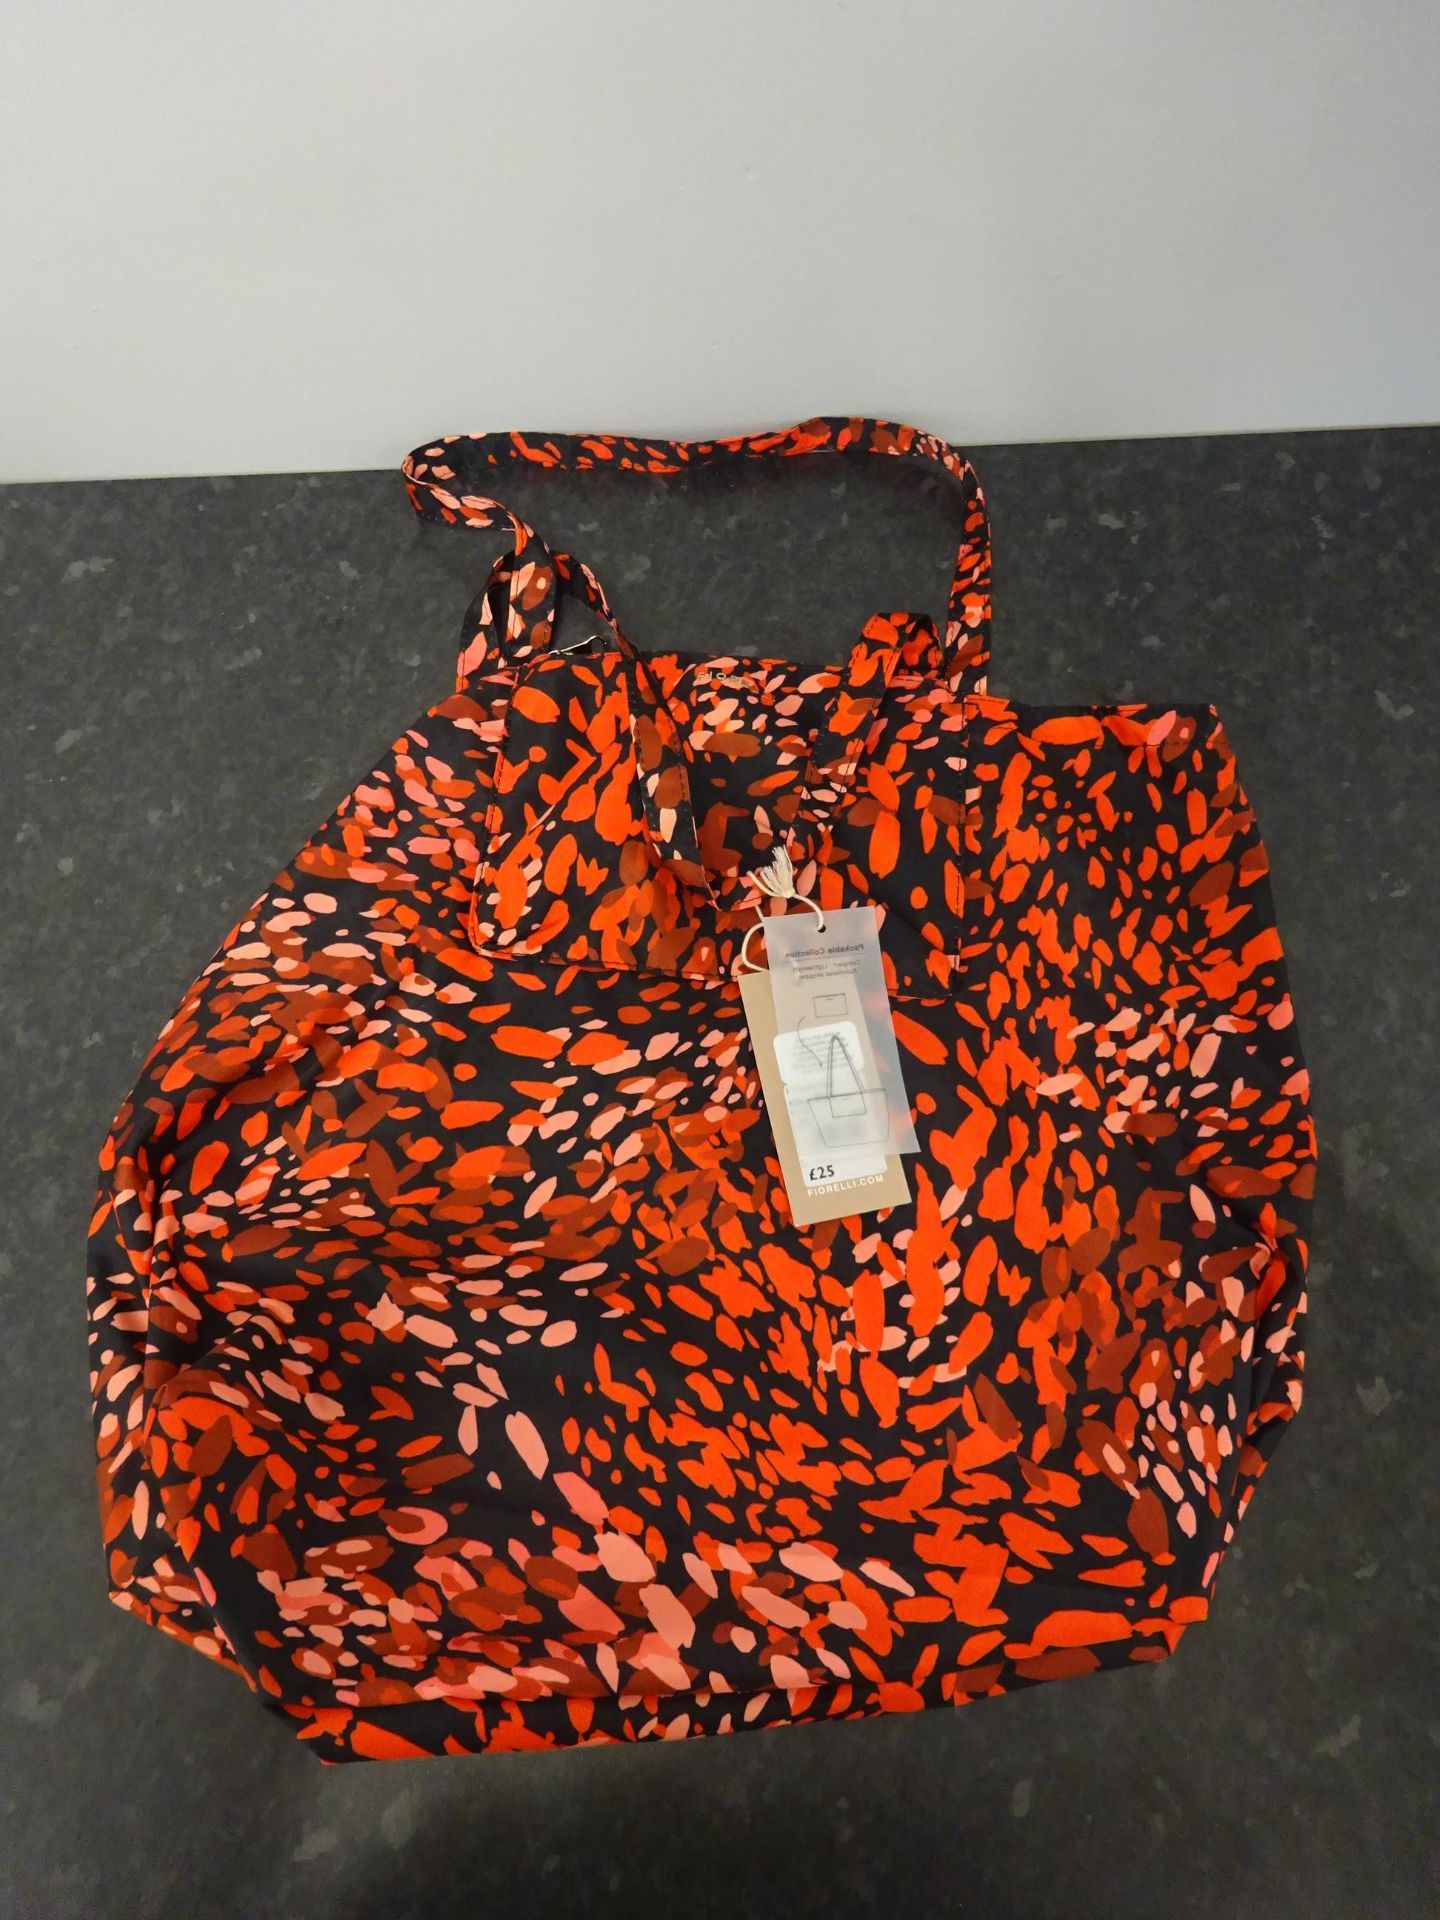 New Black & Red Spotted Fiorelli Bag - RRP £25.